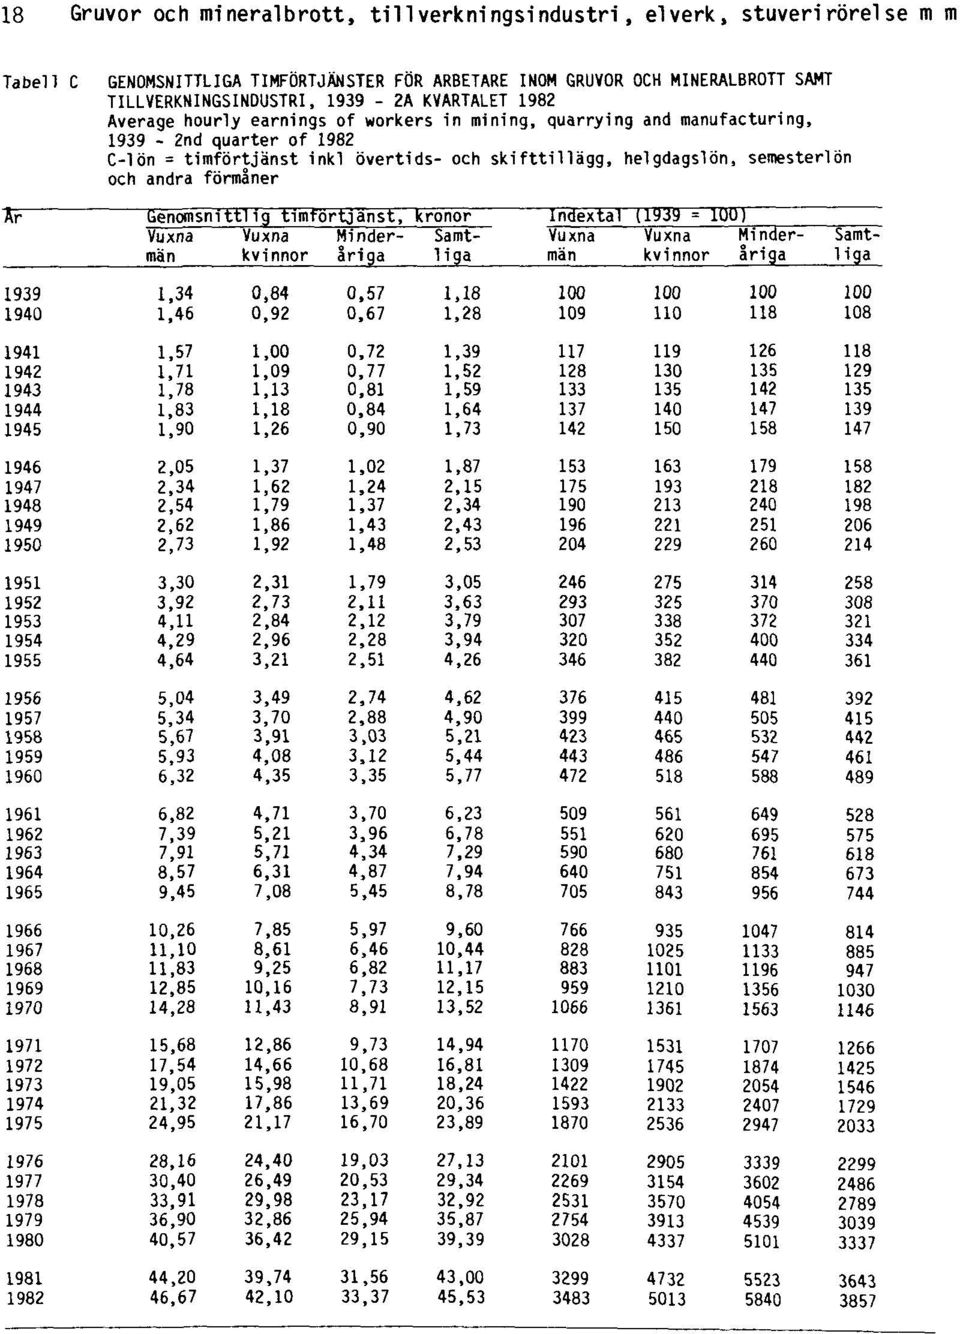 KVARTALET 1982 Average hourly earnings of workers in mining, quarrying and manufacturing, 1939-2nd